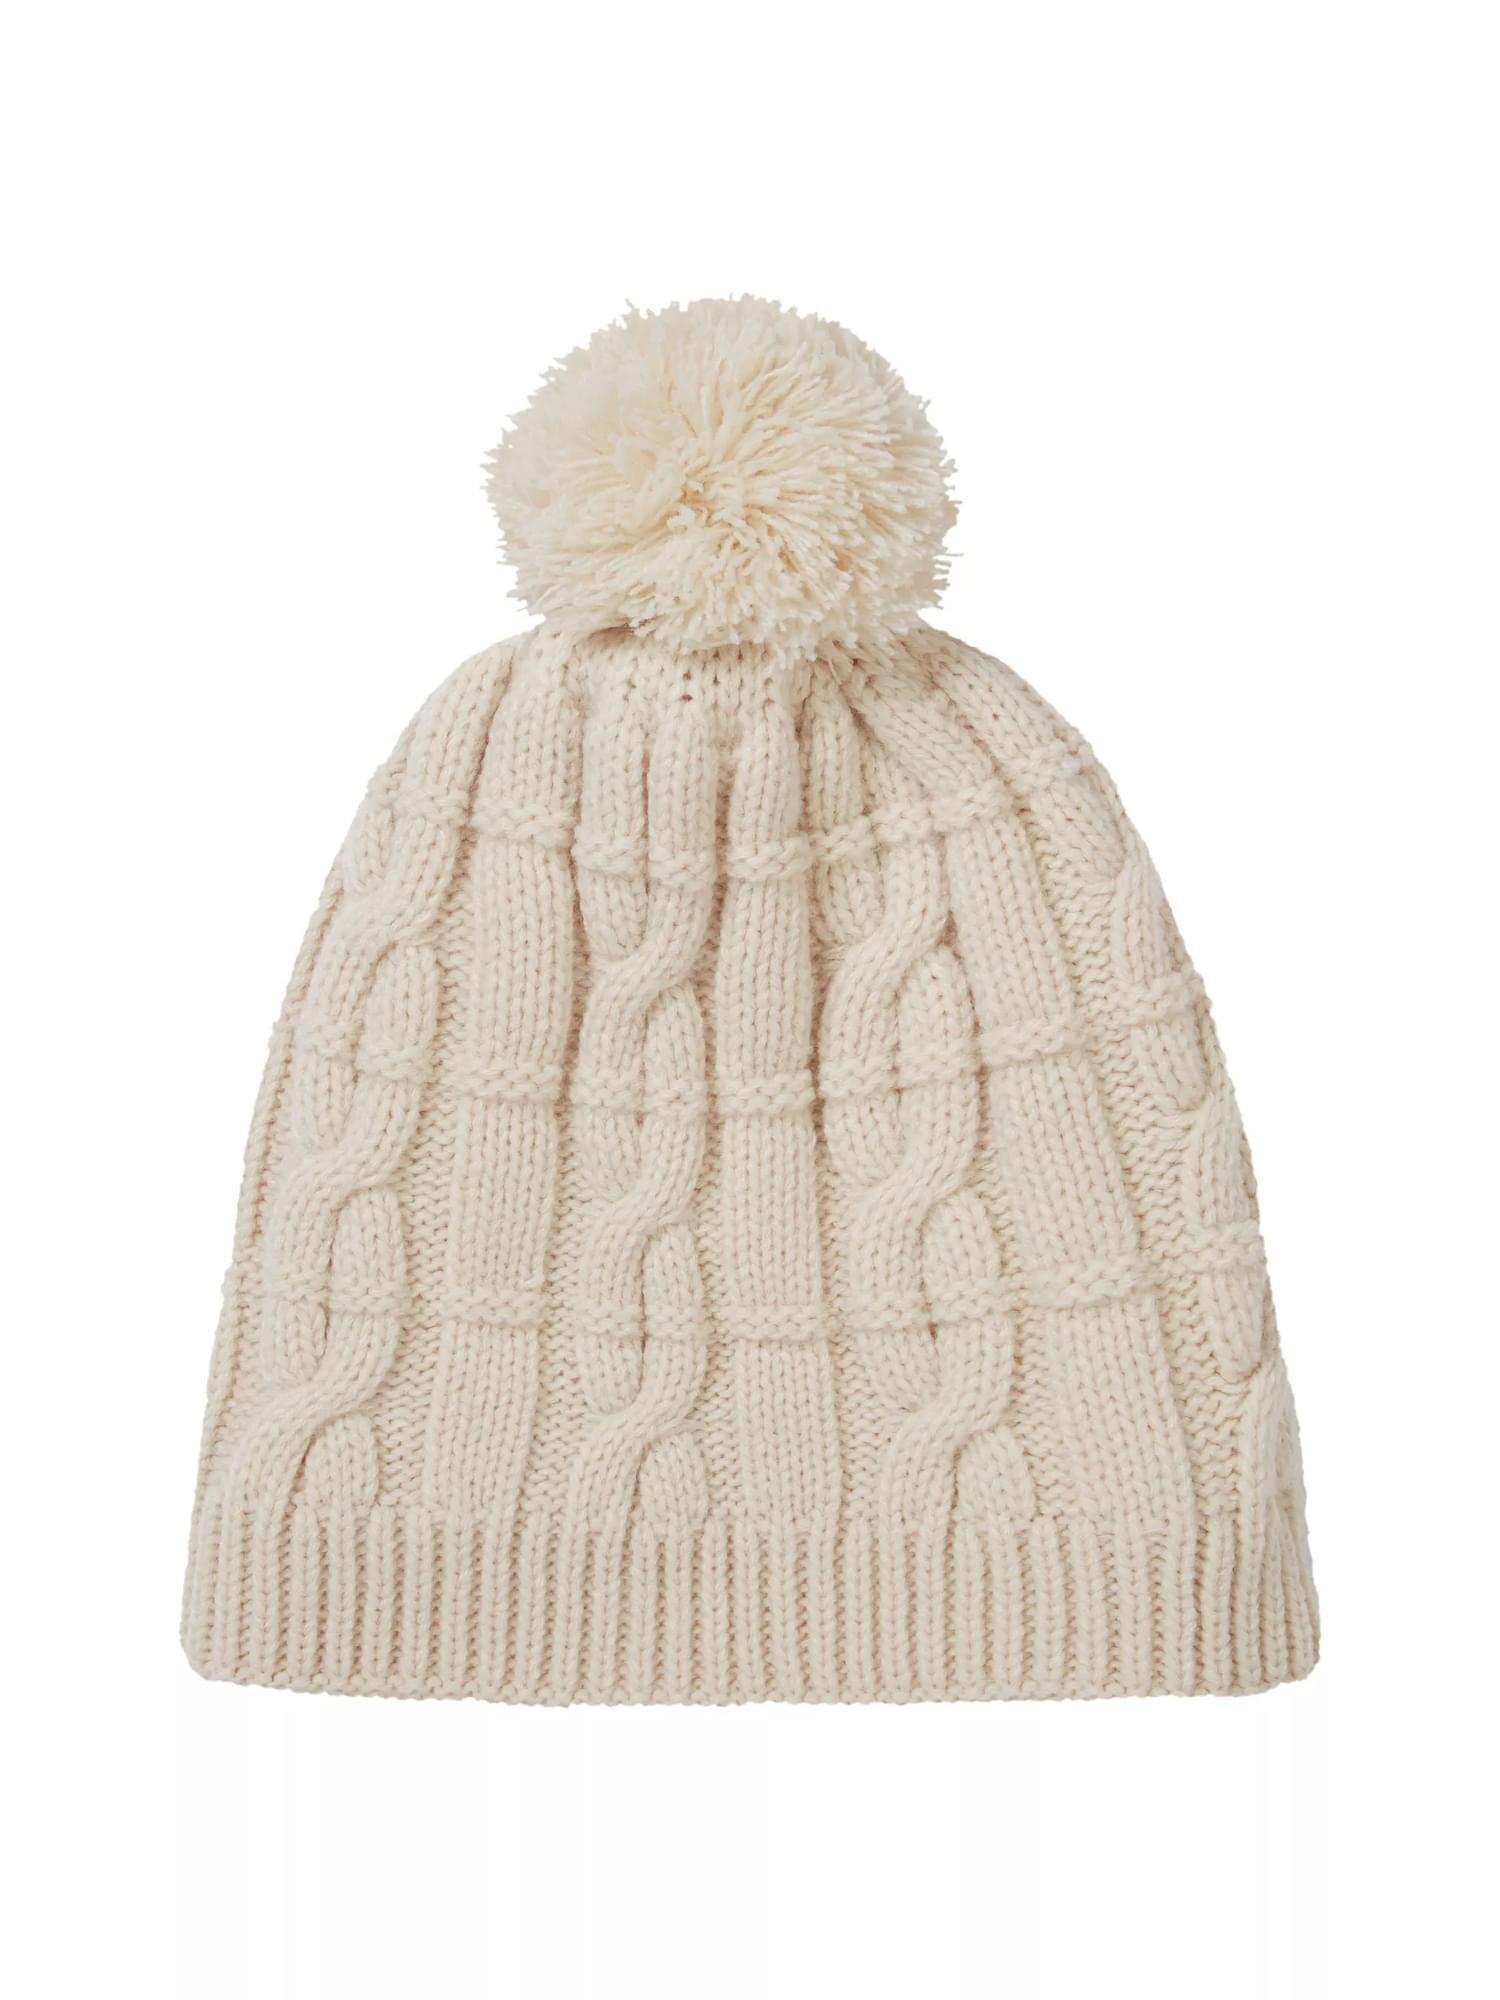 Waterproof Cold Weather Cable Knit Bobble Hat 2/3